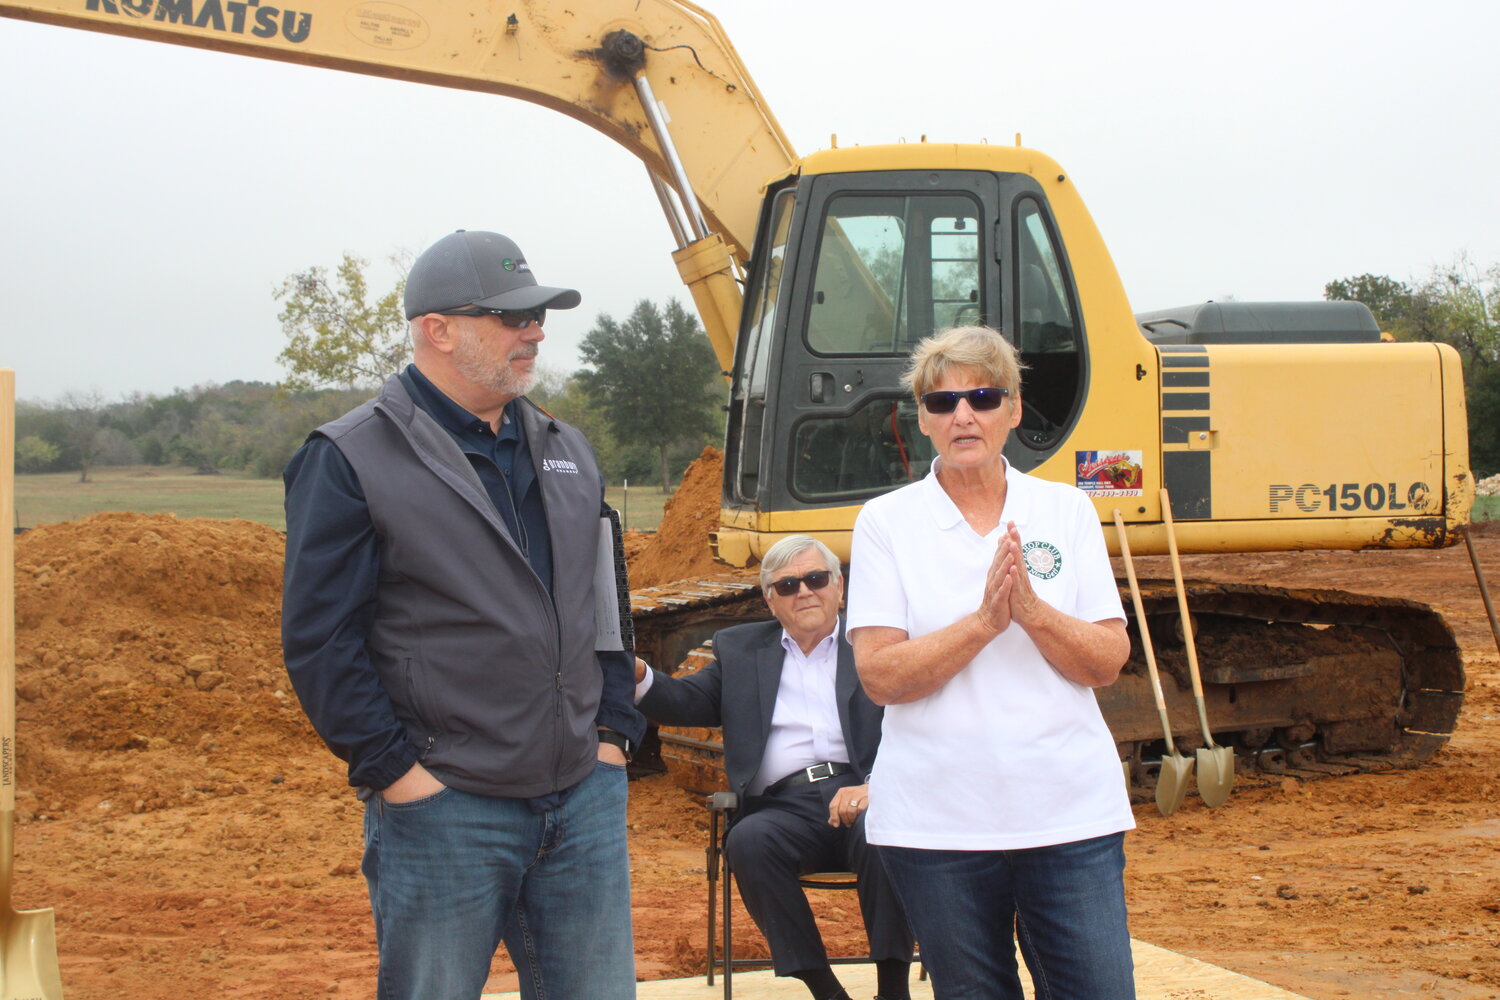 Kim Copeland, CEO of the new premier pickleball facility, right, speaks during the groundbreaking ceremony about what the public can look forward to with the TX HOP Club’s 24,000 square-foot facility. Also pictured are Randy Emerson, vice chairman of ambassador of the Granbury Chamber of Commerce, left, and Tony Callaway, president and CEO of Callaway Development Services, back.